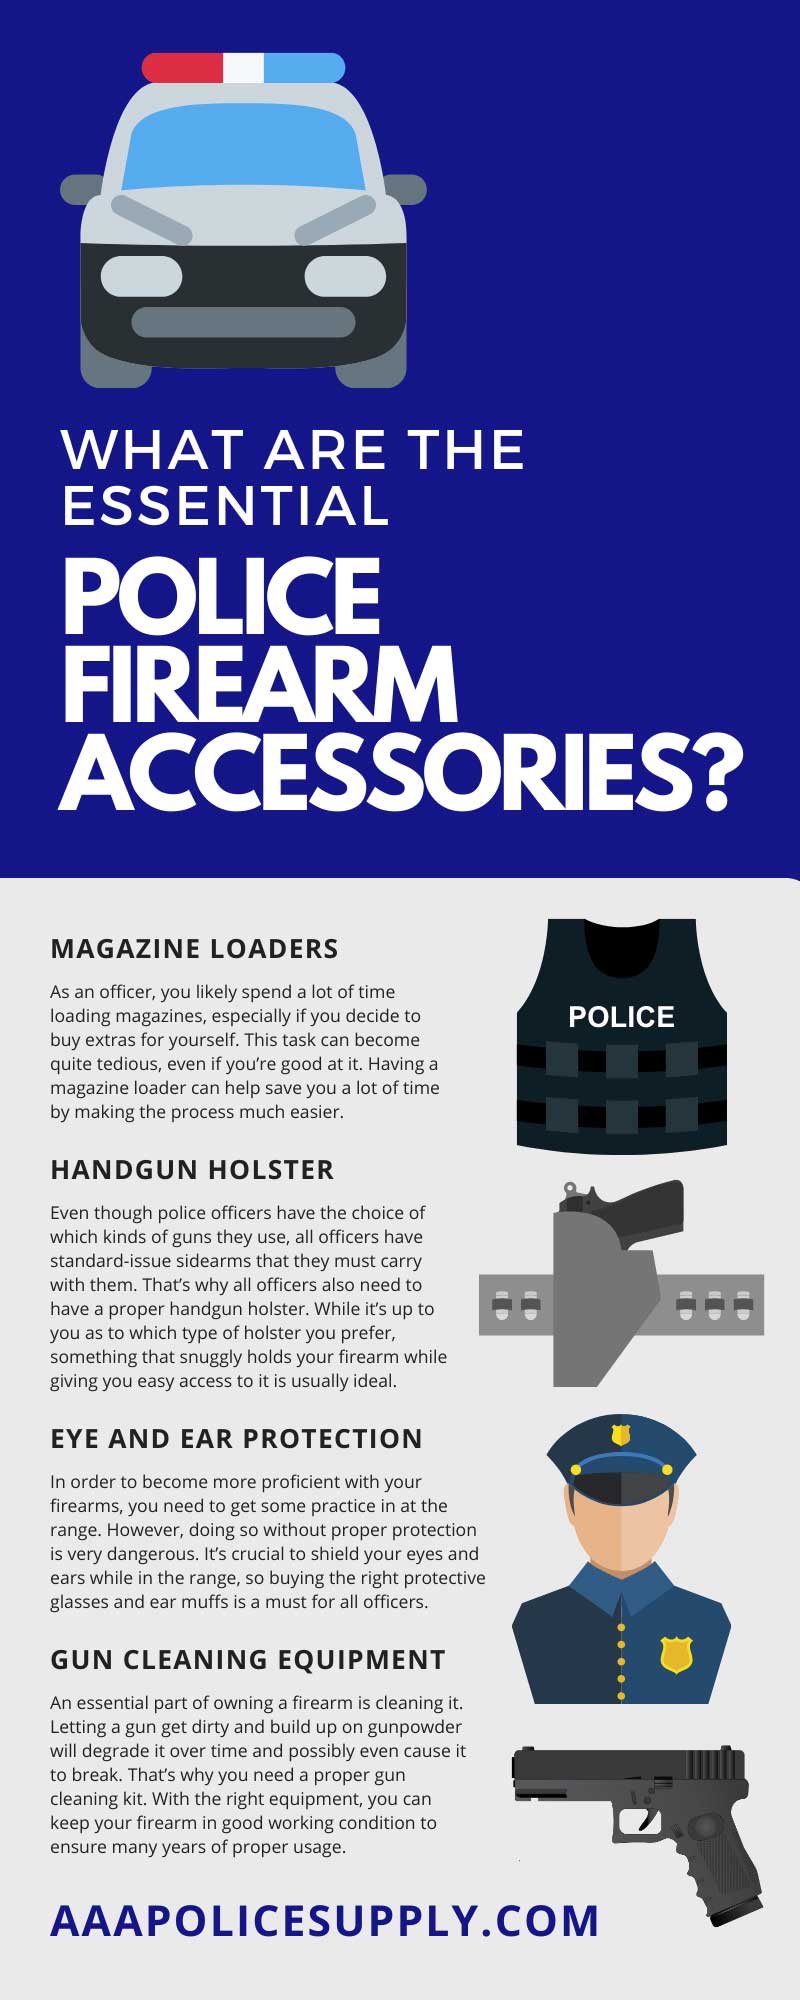 What Are the Essential Police Firearm Accessories?